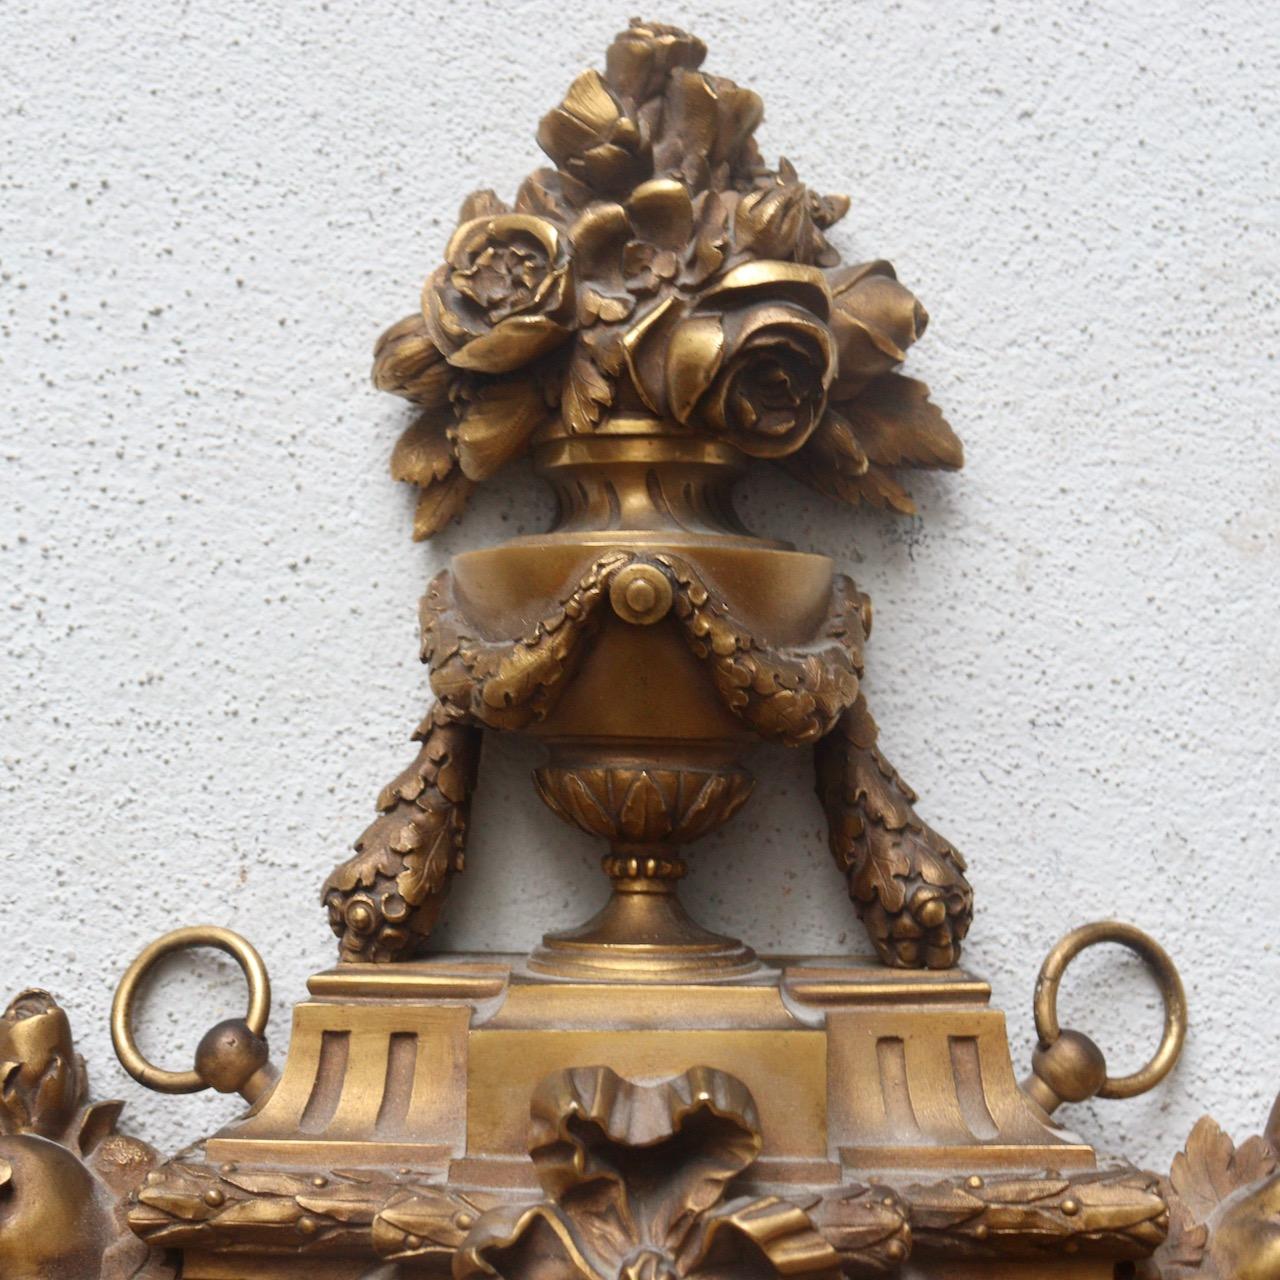 A French 19th Century Cornucopia Gilt-Bronze Cartel, by Susse Frères Paris

An Ormolu Cartel in the shape of an escutcheon, with a circular white enamel dial, signed Susse Frères/A Paris, Arabic numerals for the hours and for the minutes.
It's